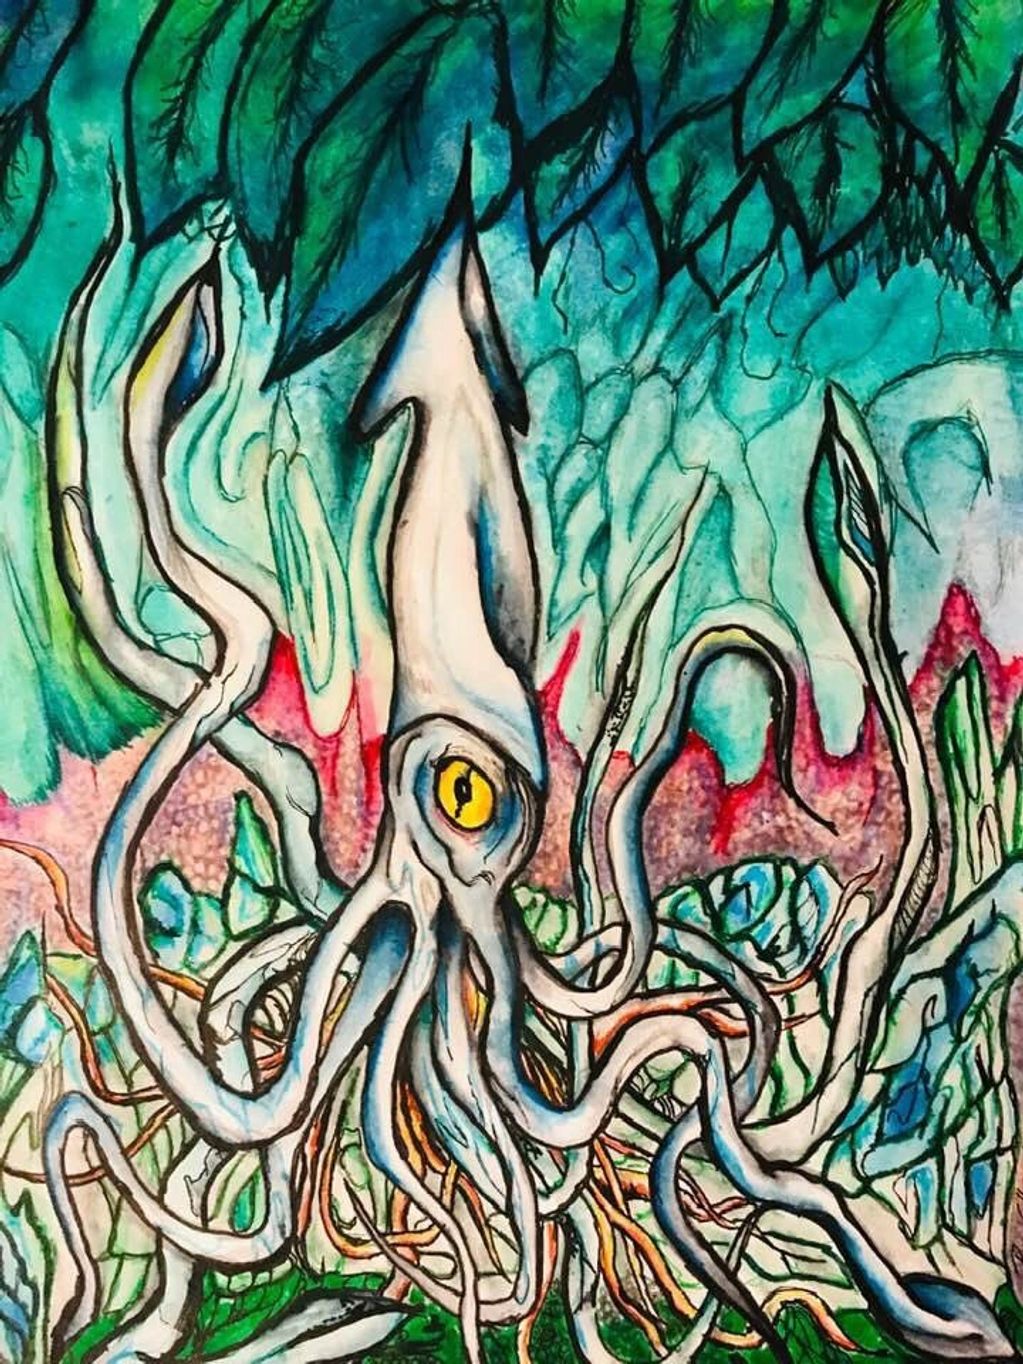 "Tentacles"
Ink and Watercolor on Paper
2019